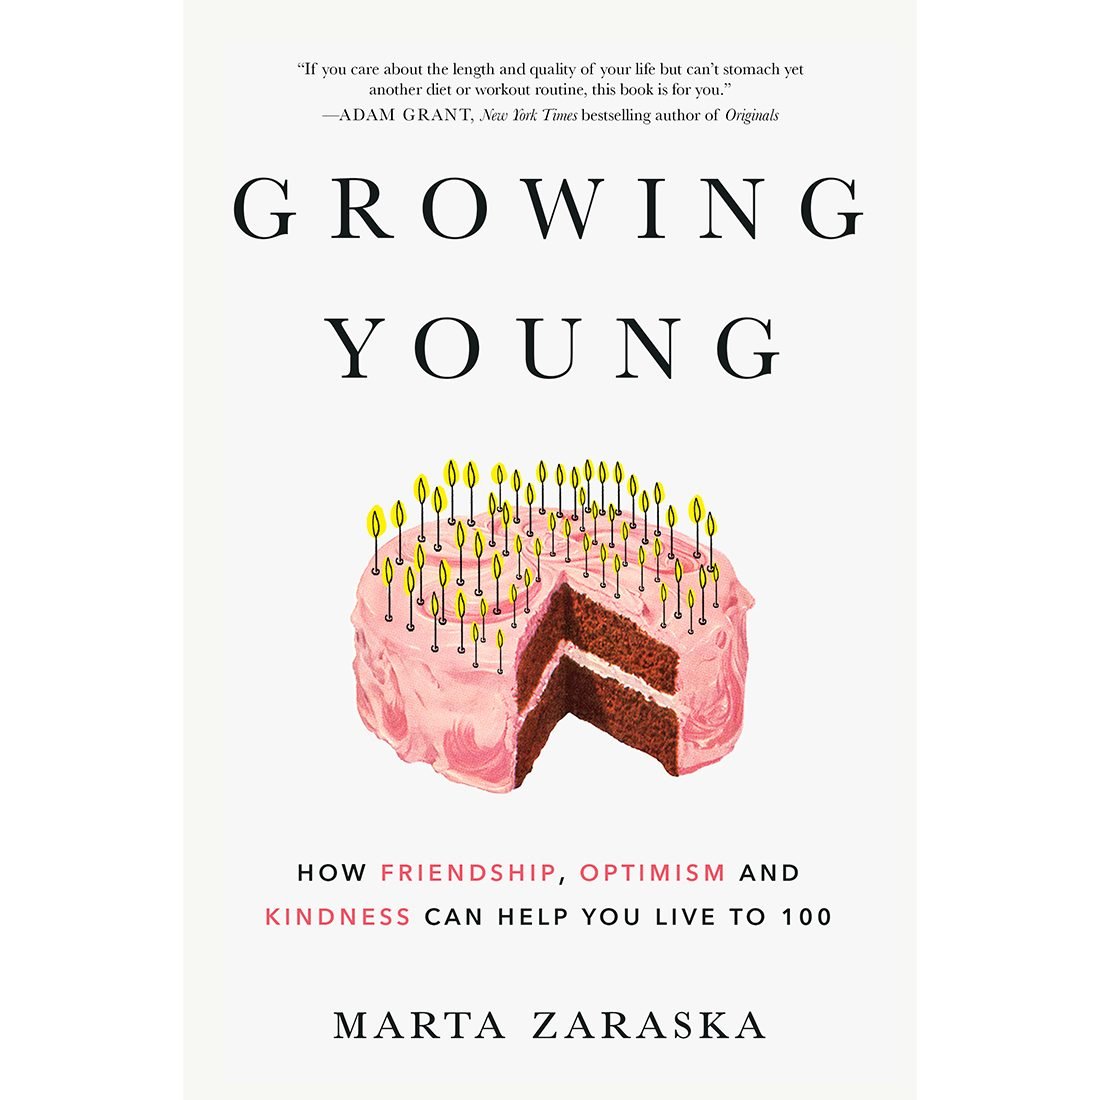 Growing Young book cover